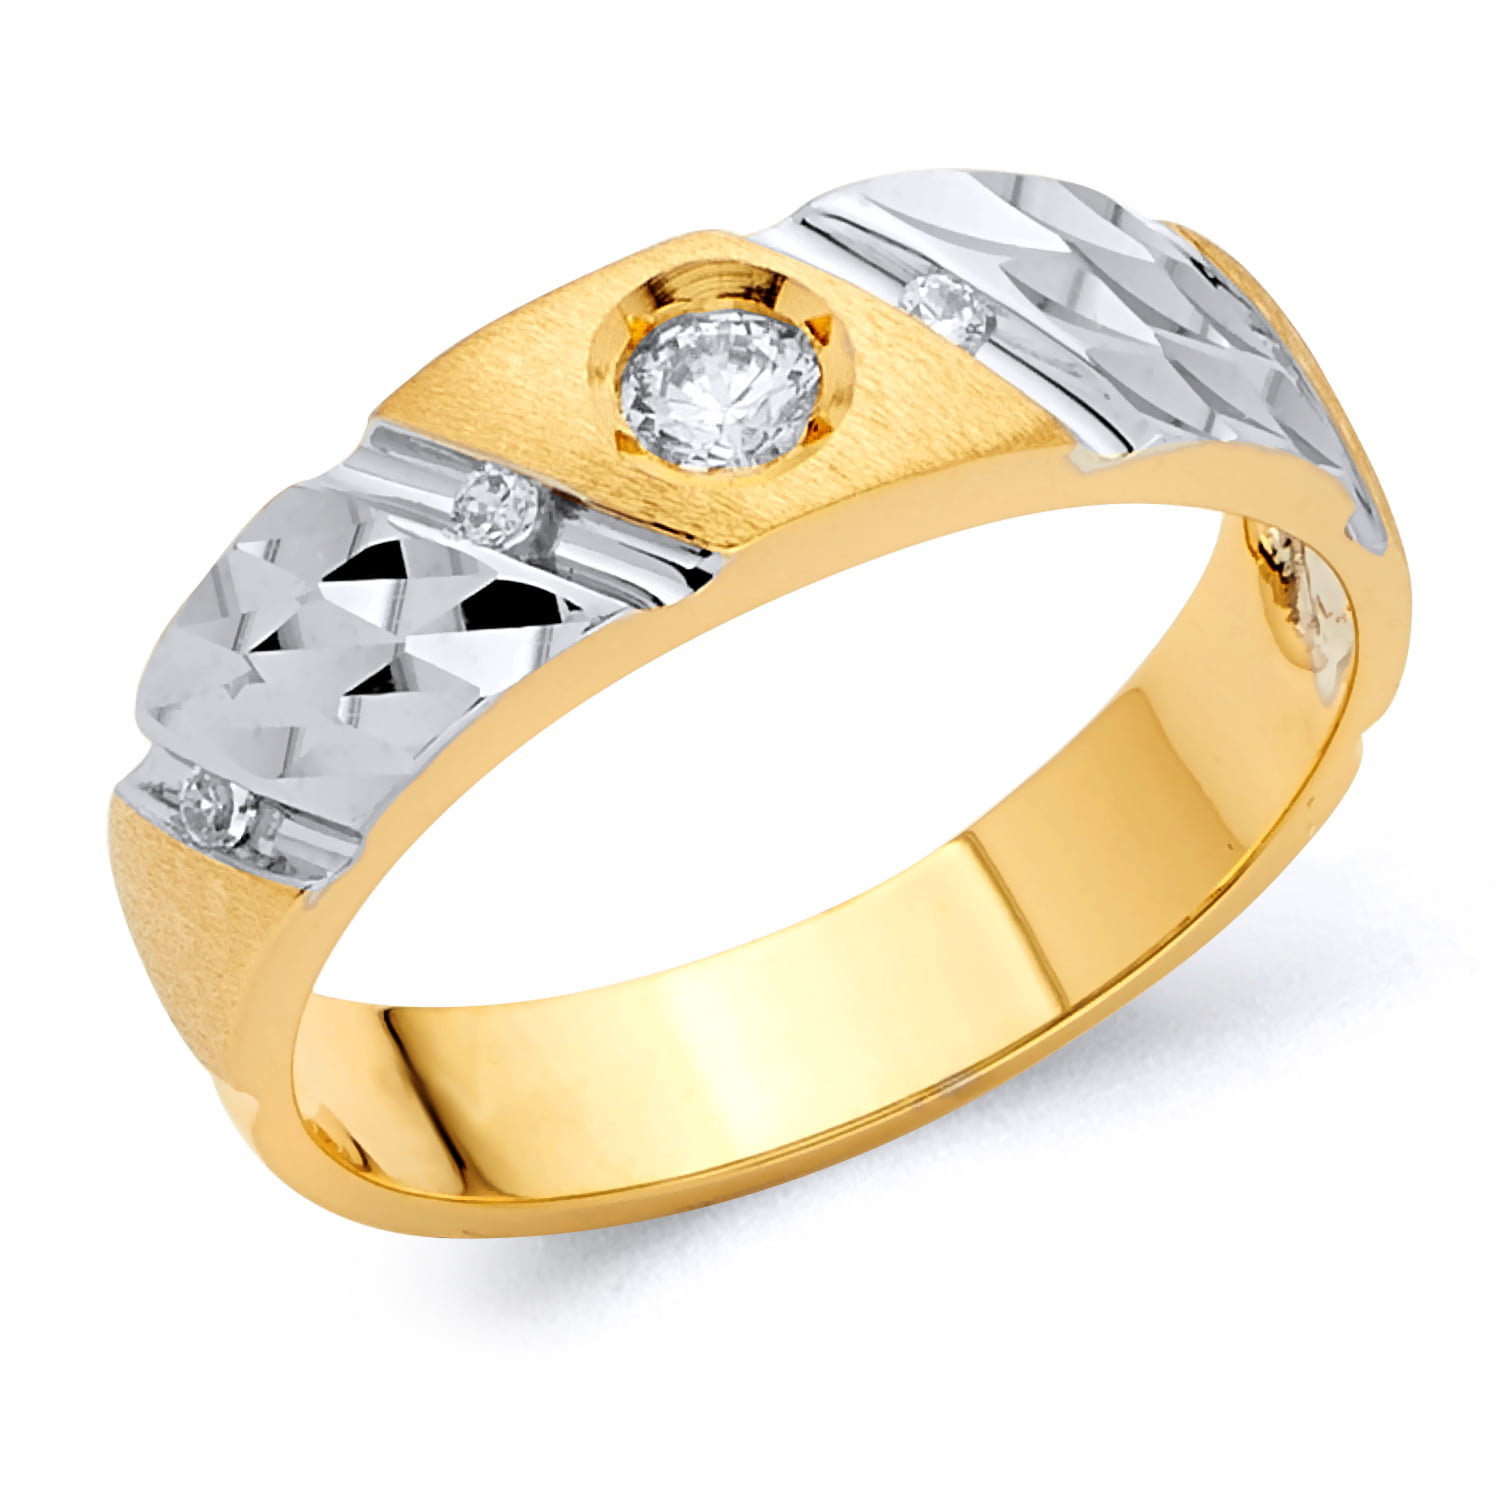 Wellingsale Mens 14K Two 2 Tone White and Yellow Gold Polished Diamond Cut CZ Cubic Zirconia Wedding Ring Band